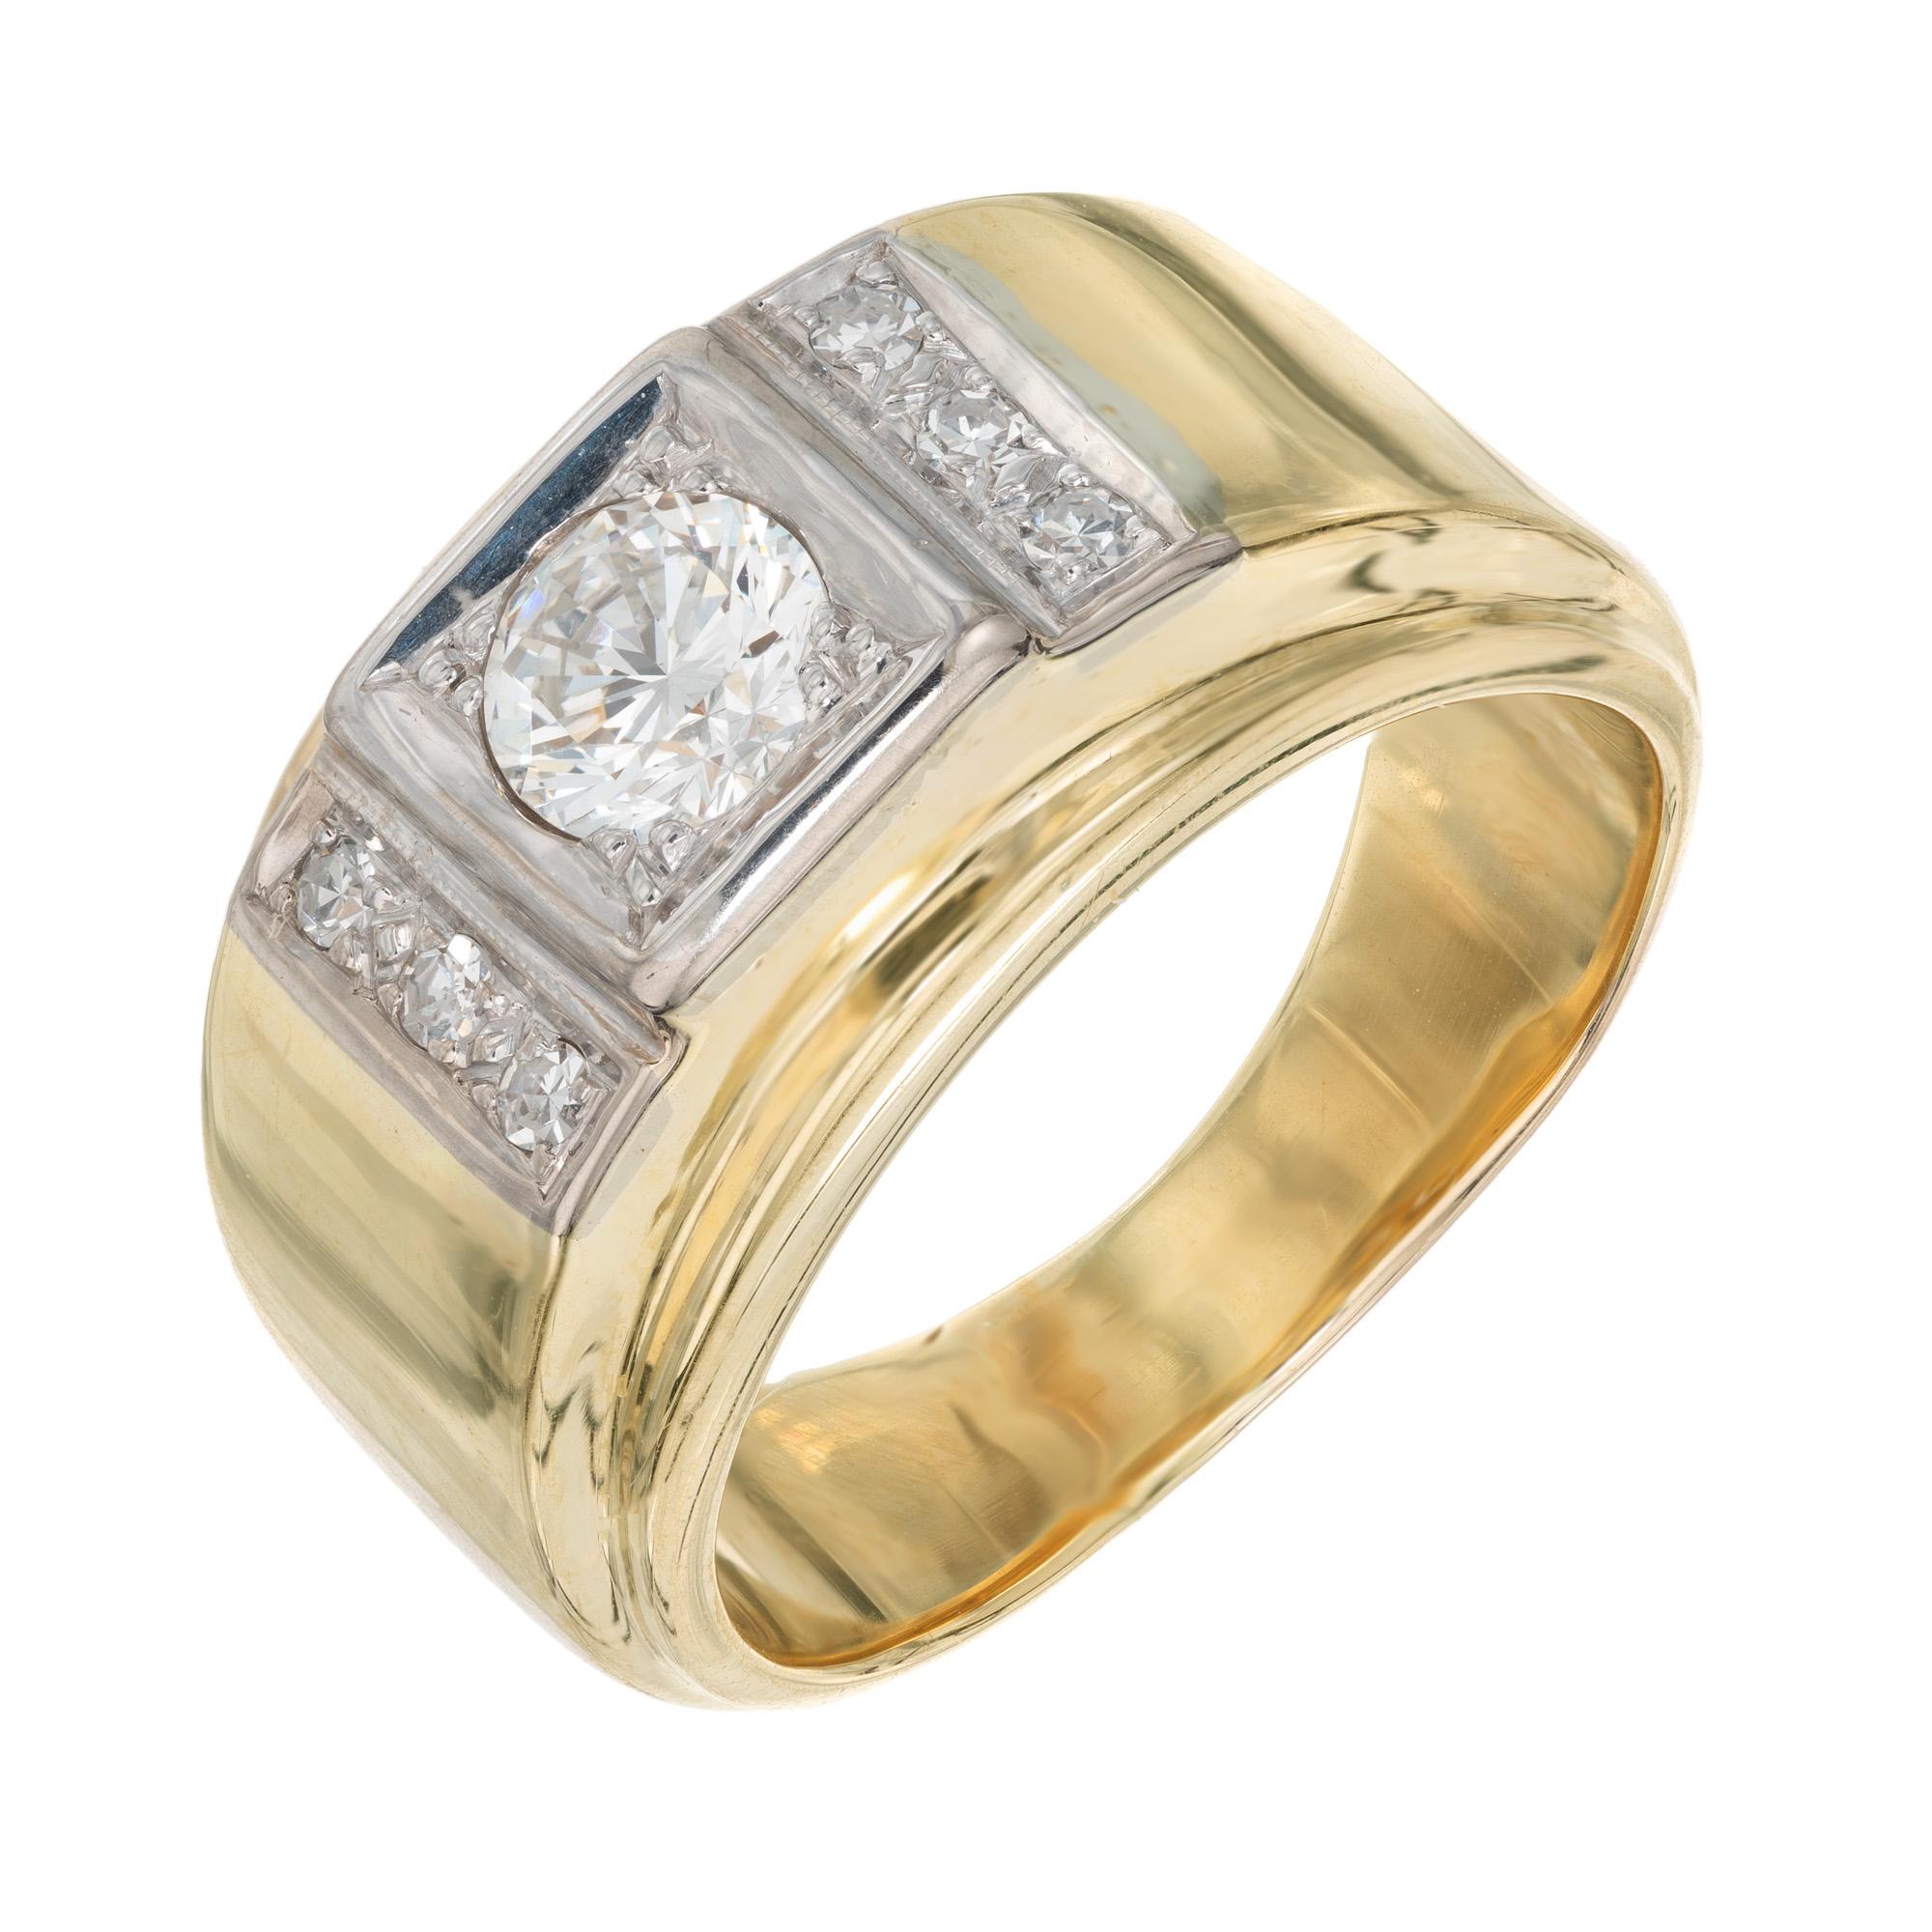 Vintage 1960's men's diamond two tone gold ring. The center is mounted with one, .50cts round brilliant Ideal cut diamond and accented with three sing cut diamonds on each side of the stone. The crown of this ring is 14k white gold with the shank